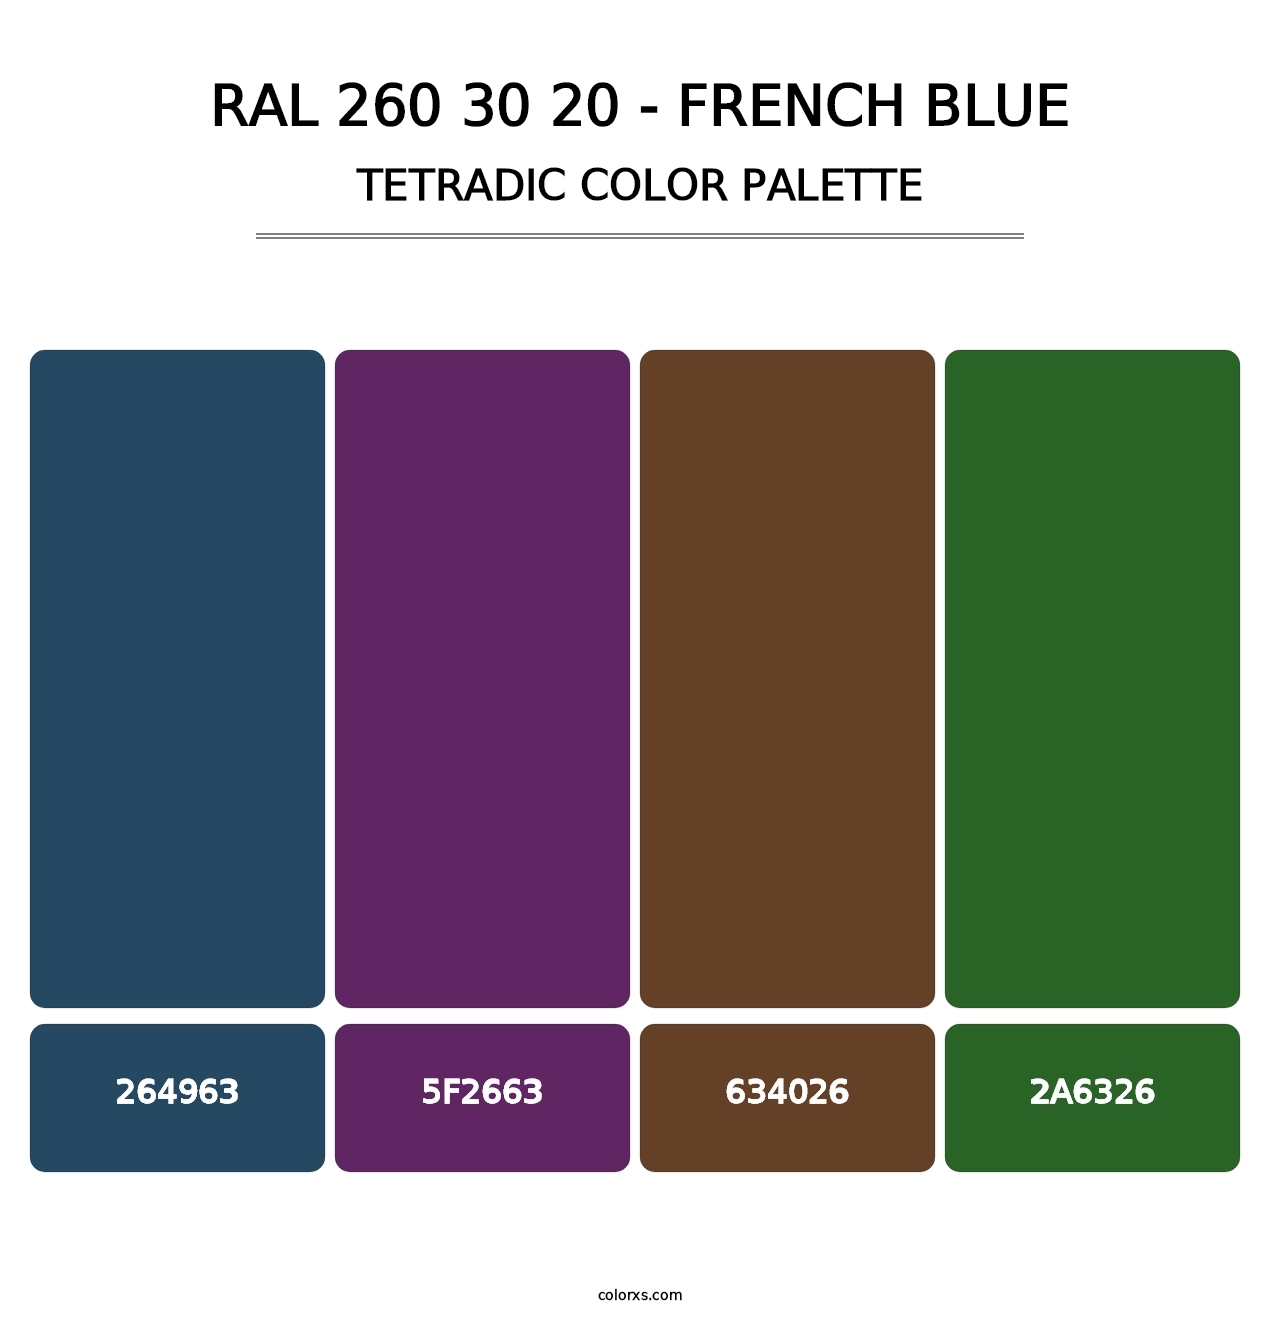 RAL 260 30 20 - French Blue - Tetradic Color Palette